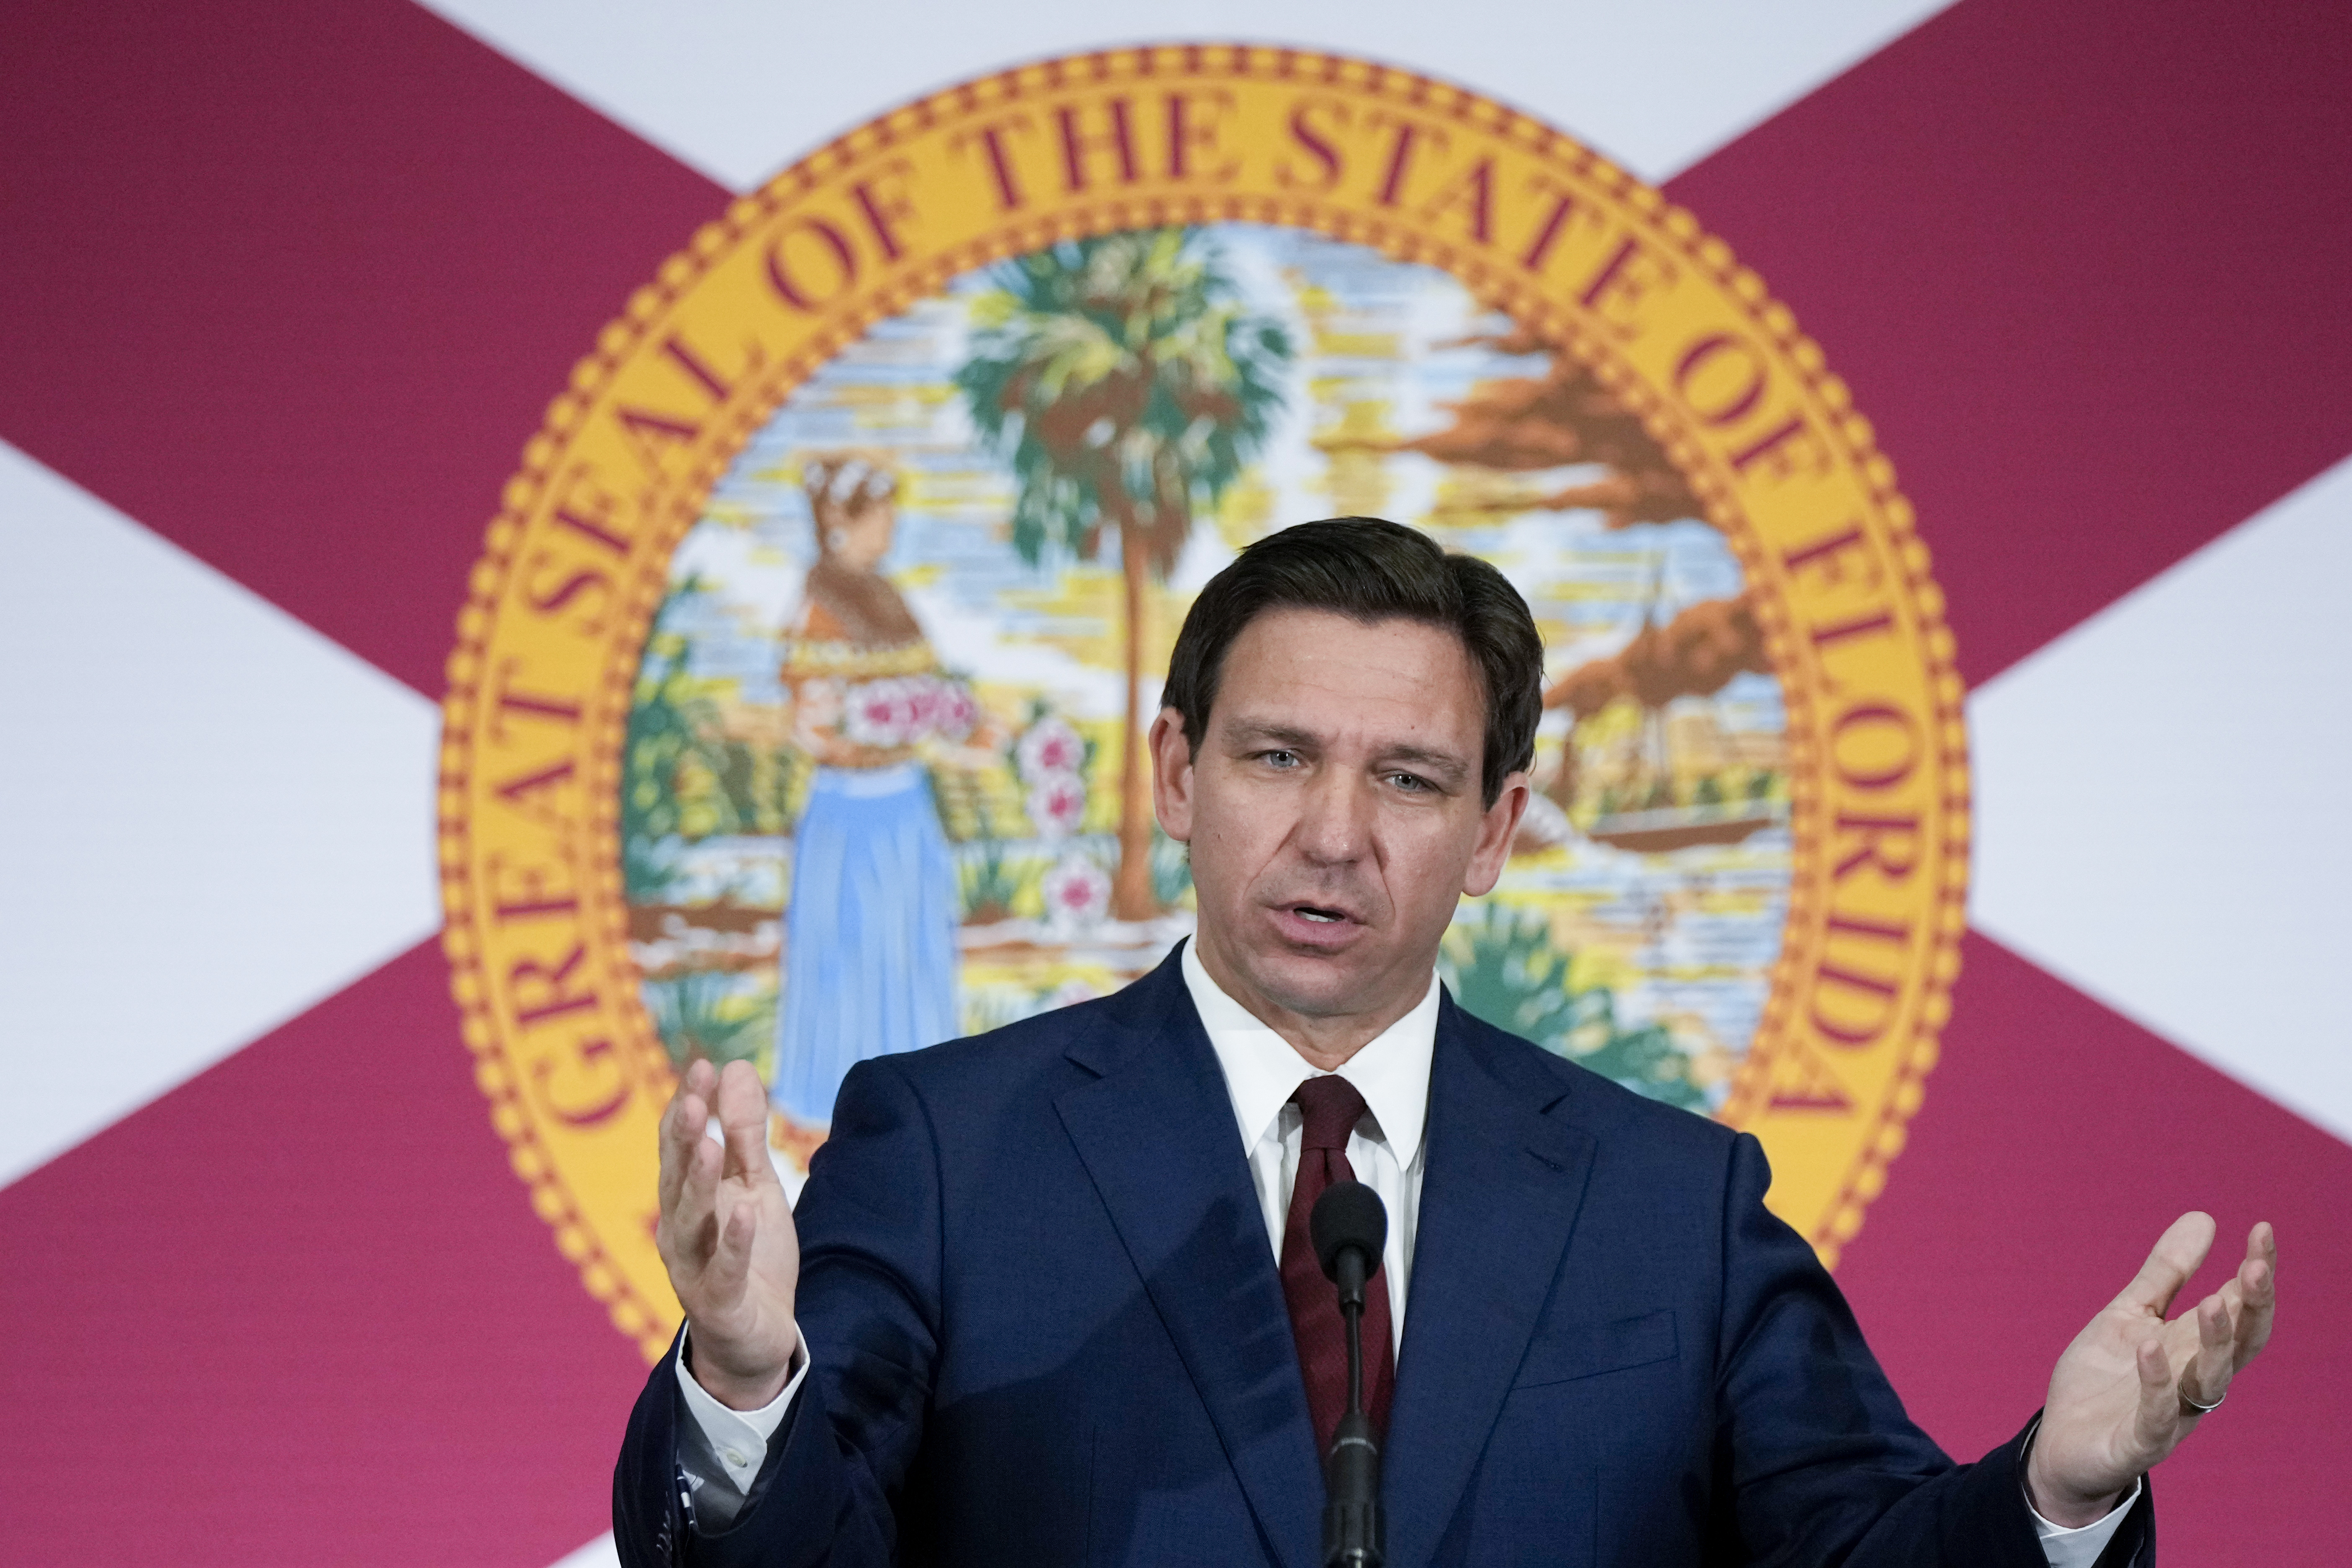 FILE - Florida Gov. Ron DeSantis speaks during a news conference in Miami, on May 9, 2023. The Treasury Department is warning that state laws that restrict banks from considering environmental, social and governance factors could harm efforts to address money laundering and terrorism financing. The Associated Press obtained a copy of a letter sent Thursday to lawmakers. The letter single out a law signed by Florida Gov. Ron DeSantis in May that says it would be an “unsafe and unsound practice” for banks to consider non-financial factors when doing business. (AP Photo/Rebecca Blackwell, File)